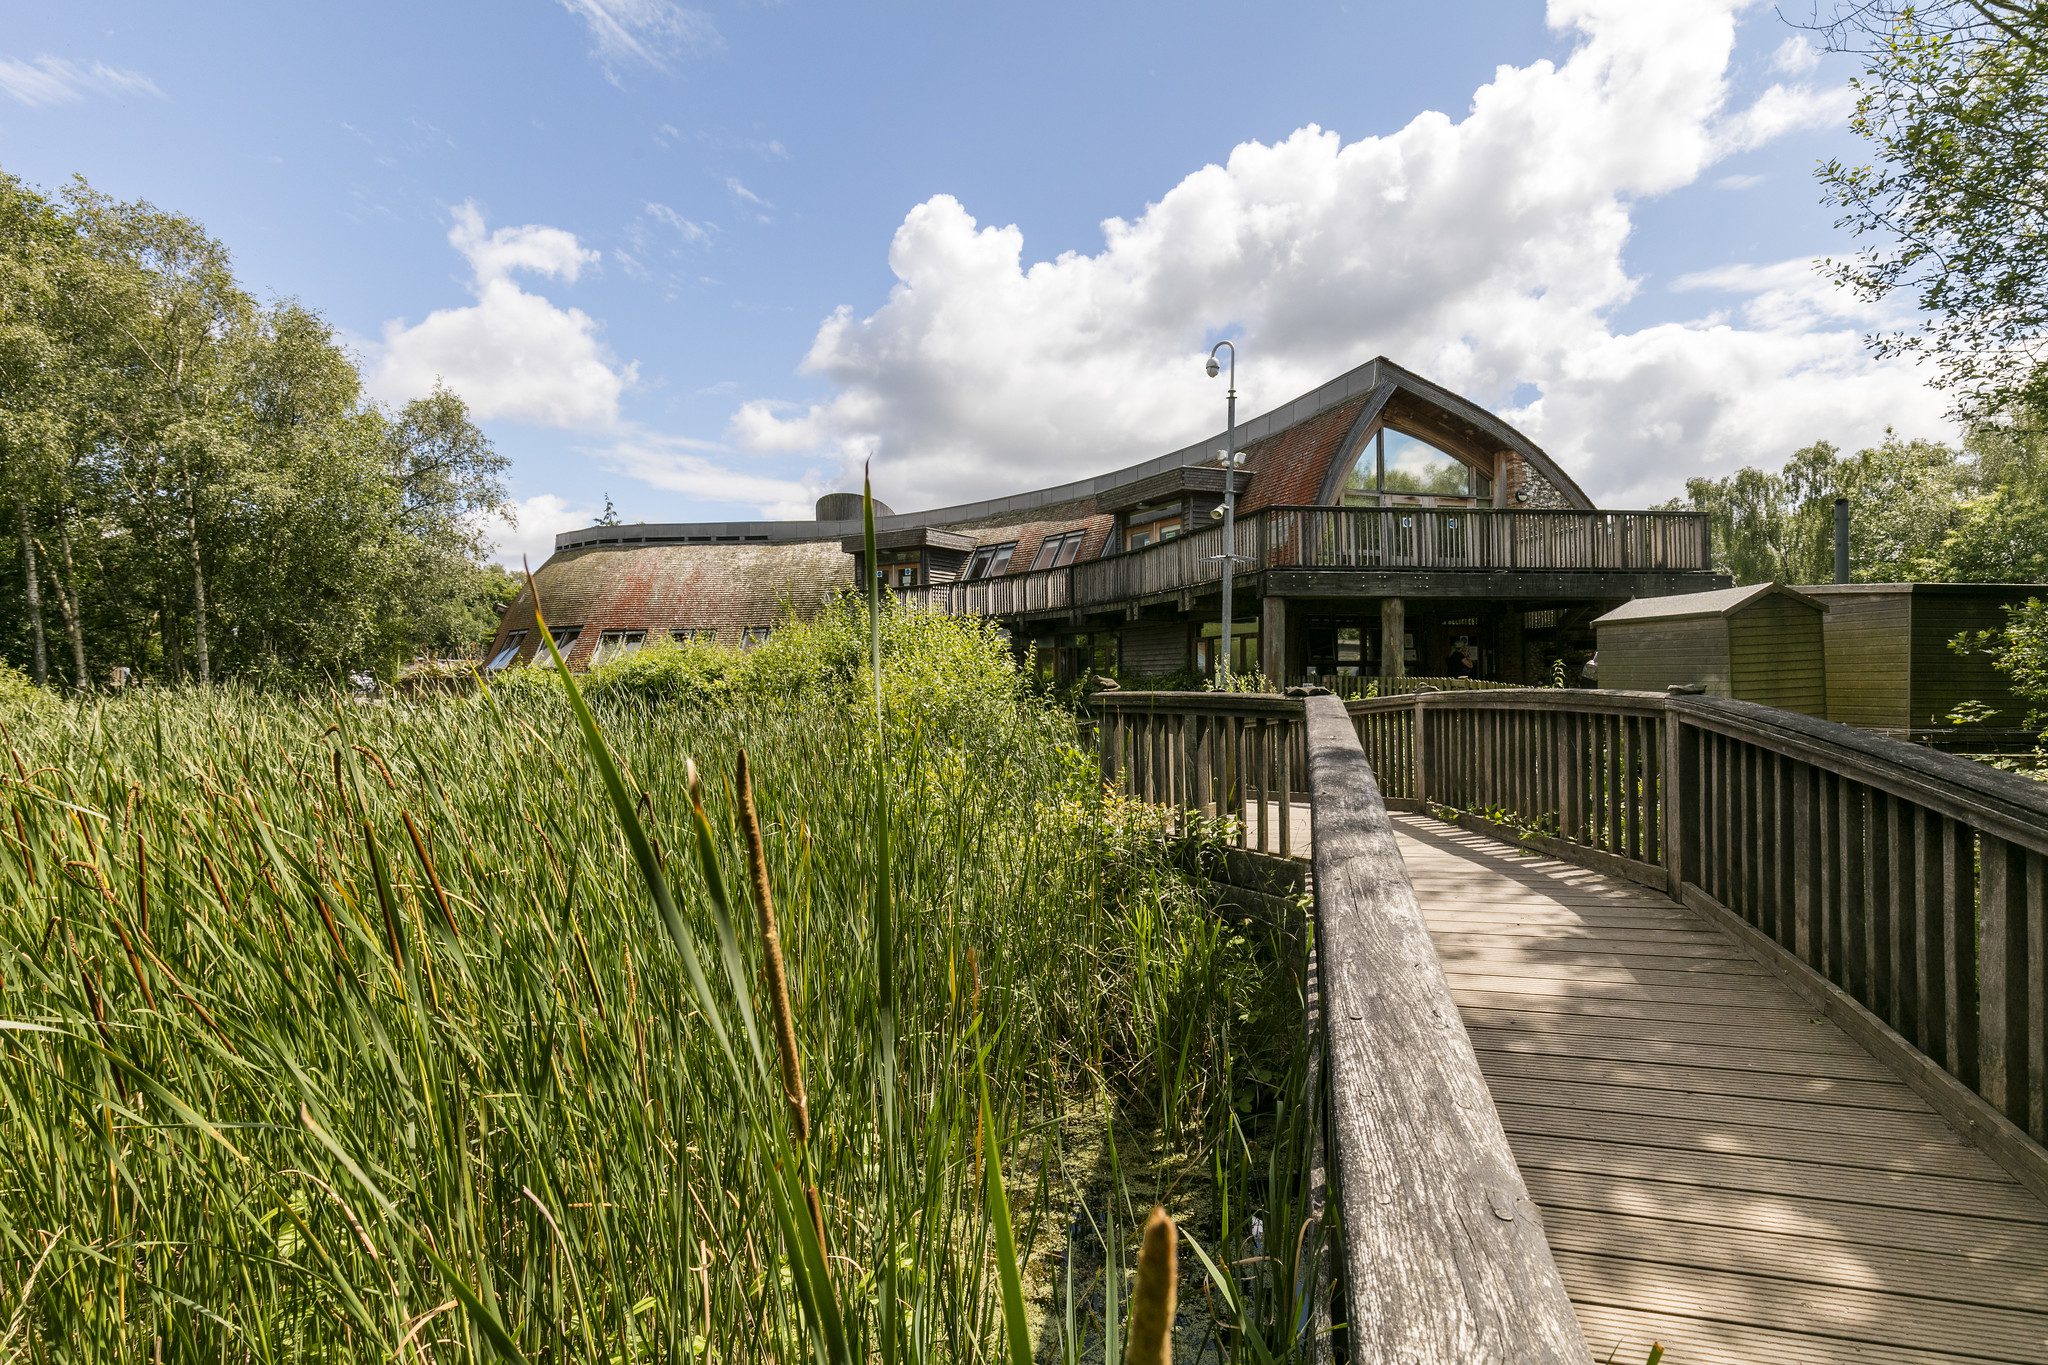 Board walk leading to wooden visitor centre with rushes